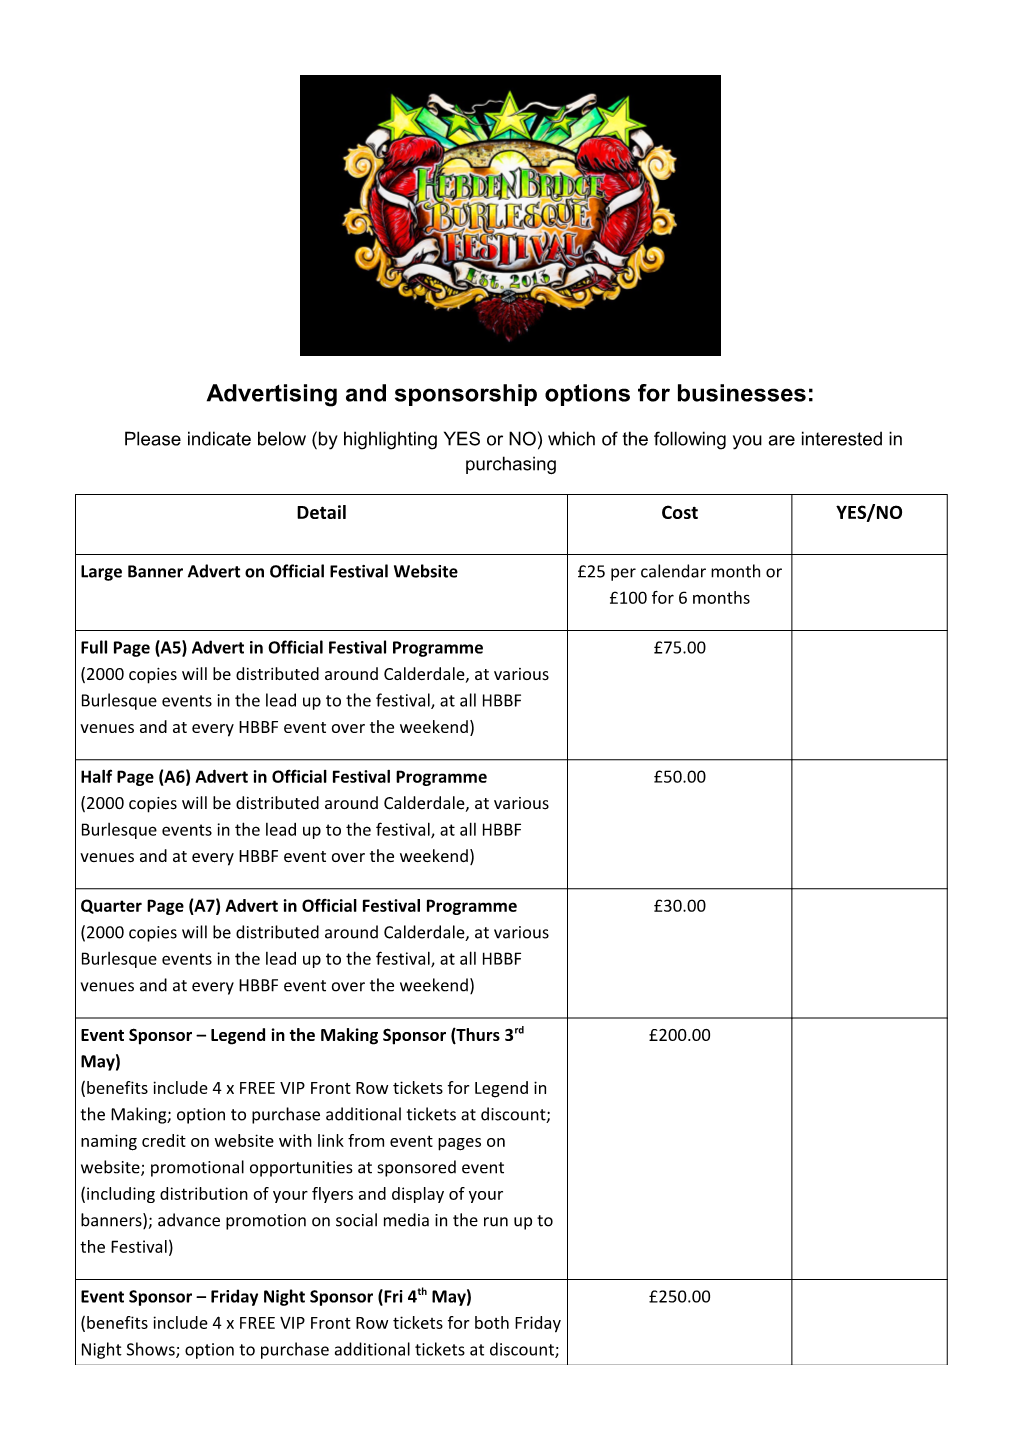 Advertising and Sponsorship Options for Businesses